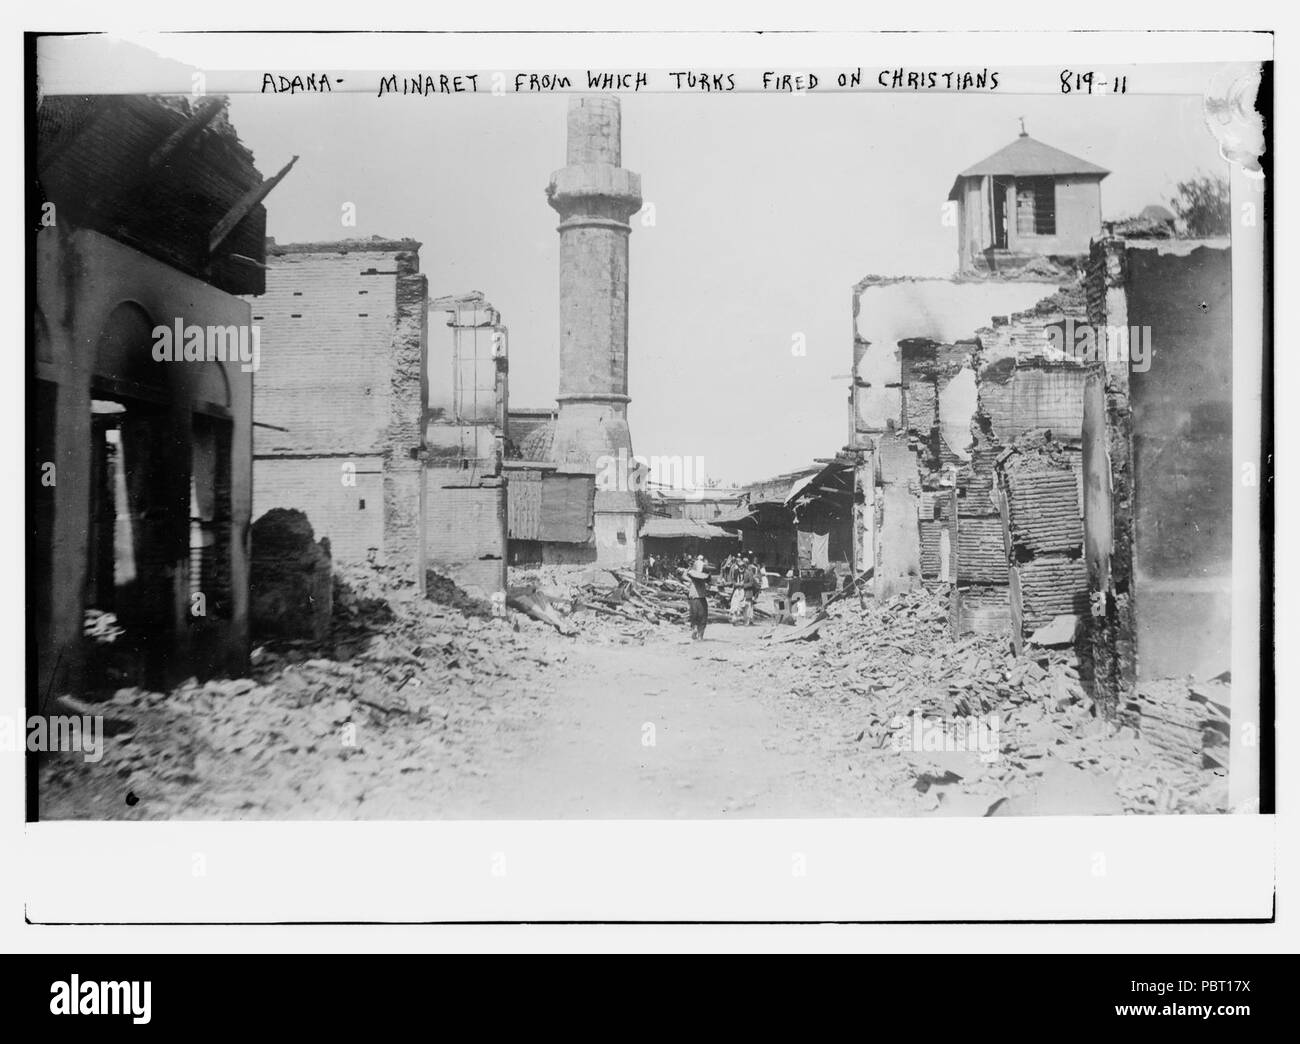 Adana - Minaret from which Turks fired on Christians Stock Photo